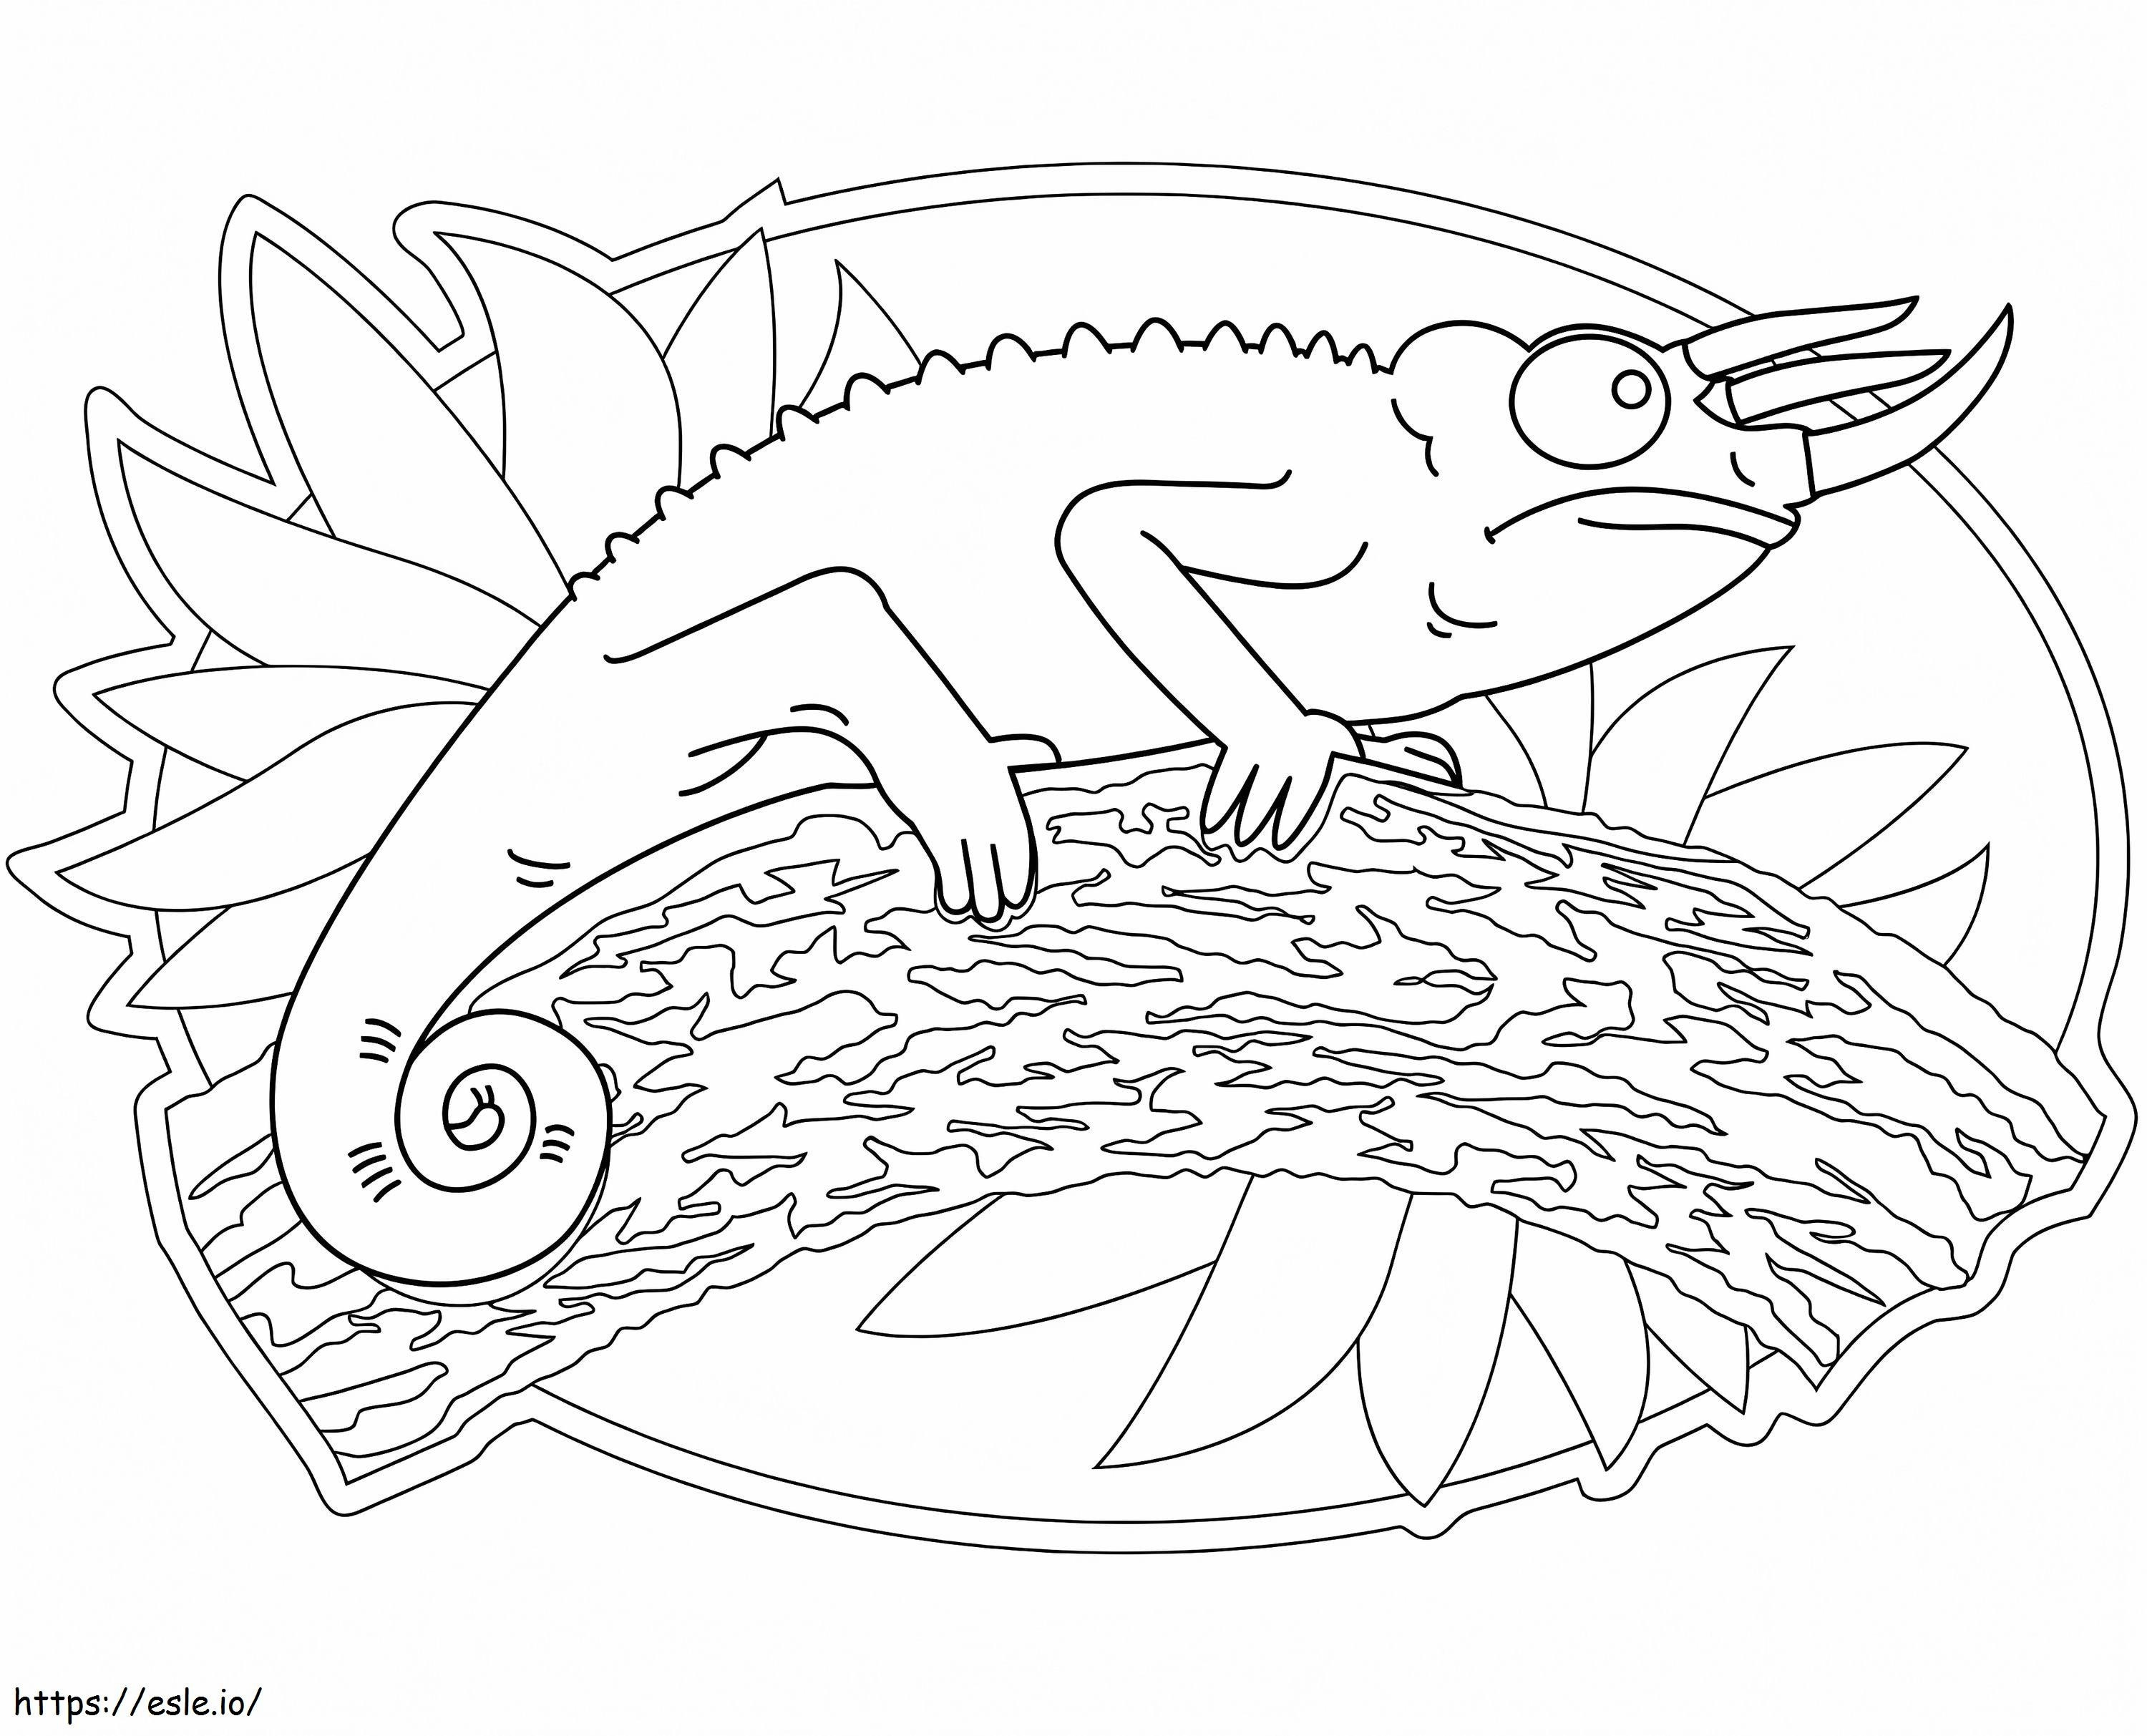 Three-Headed Chameleon coloring page